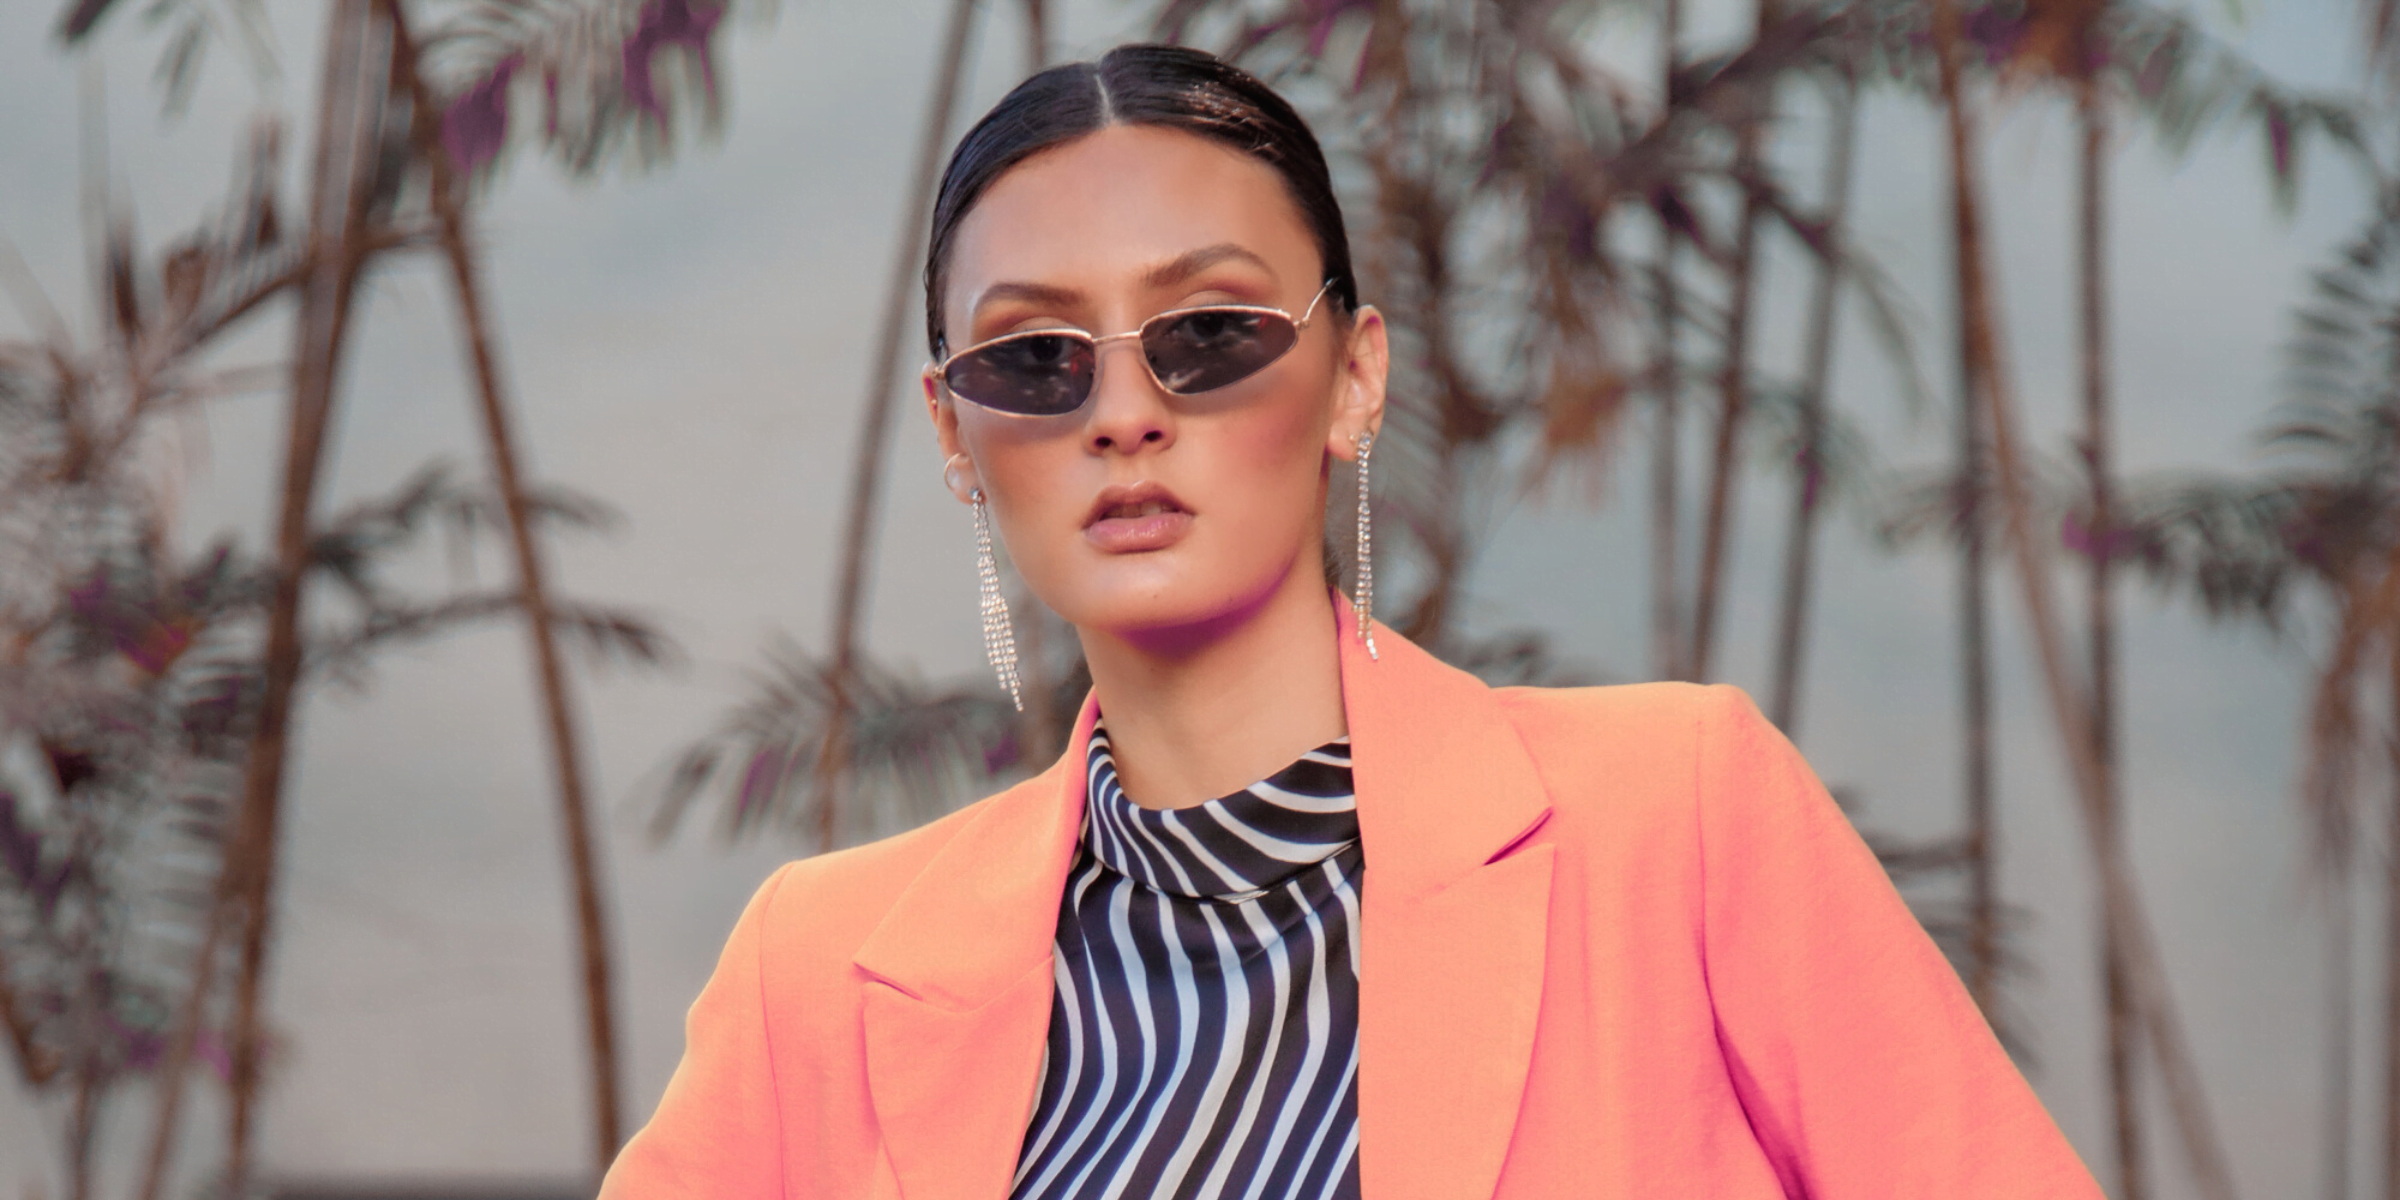 woman in orange blazer and zebra striped blouse and trendy sunglasses looking unforgettable before entering business networking event